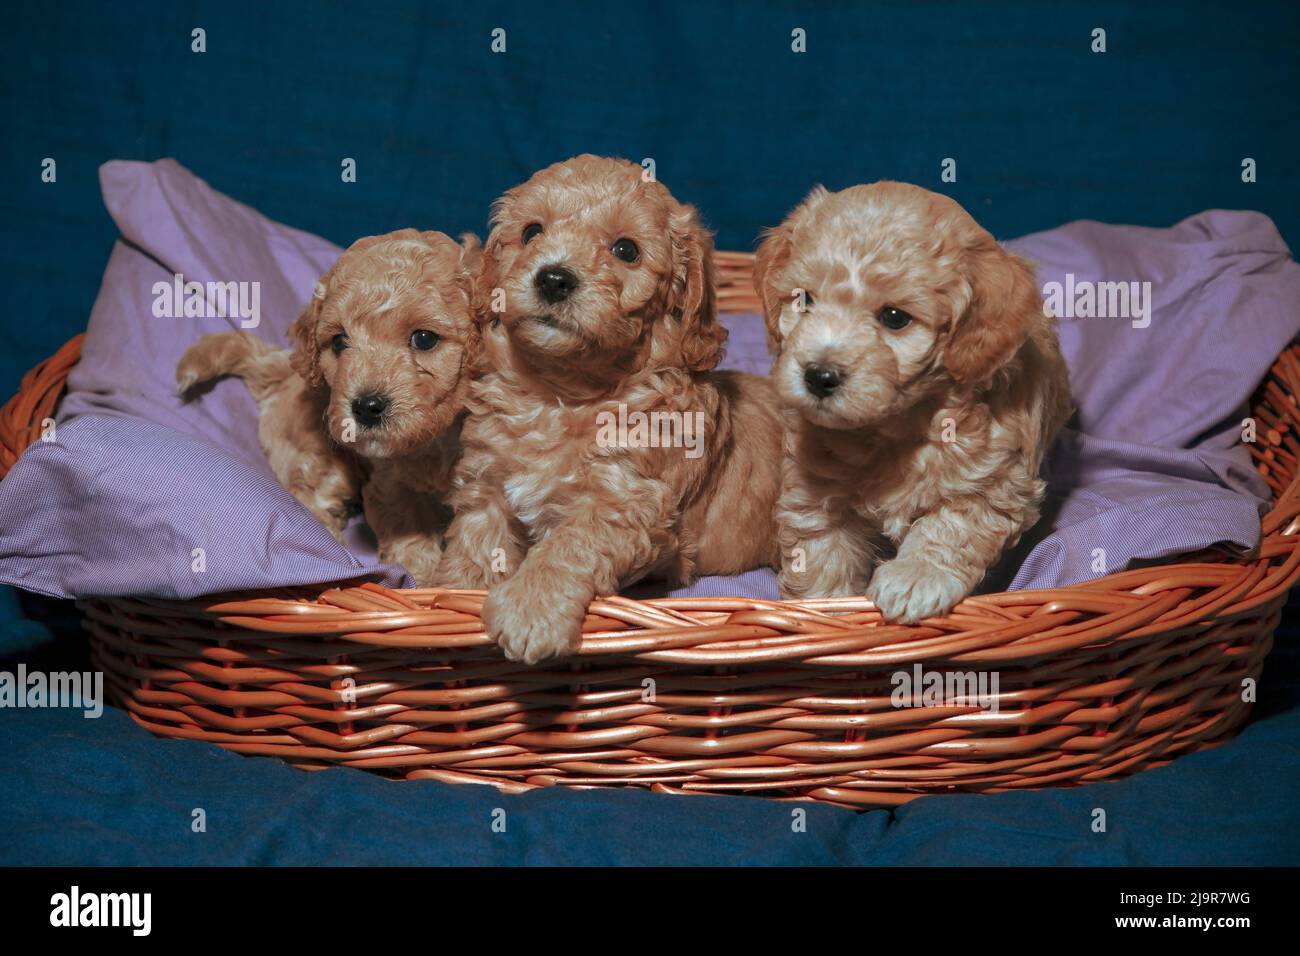 Five-week-old Poochon (Poodle & Bichon mix) puppies posing in a basket Stock Photo